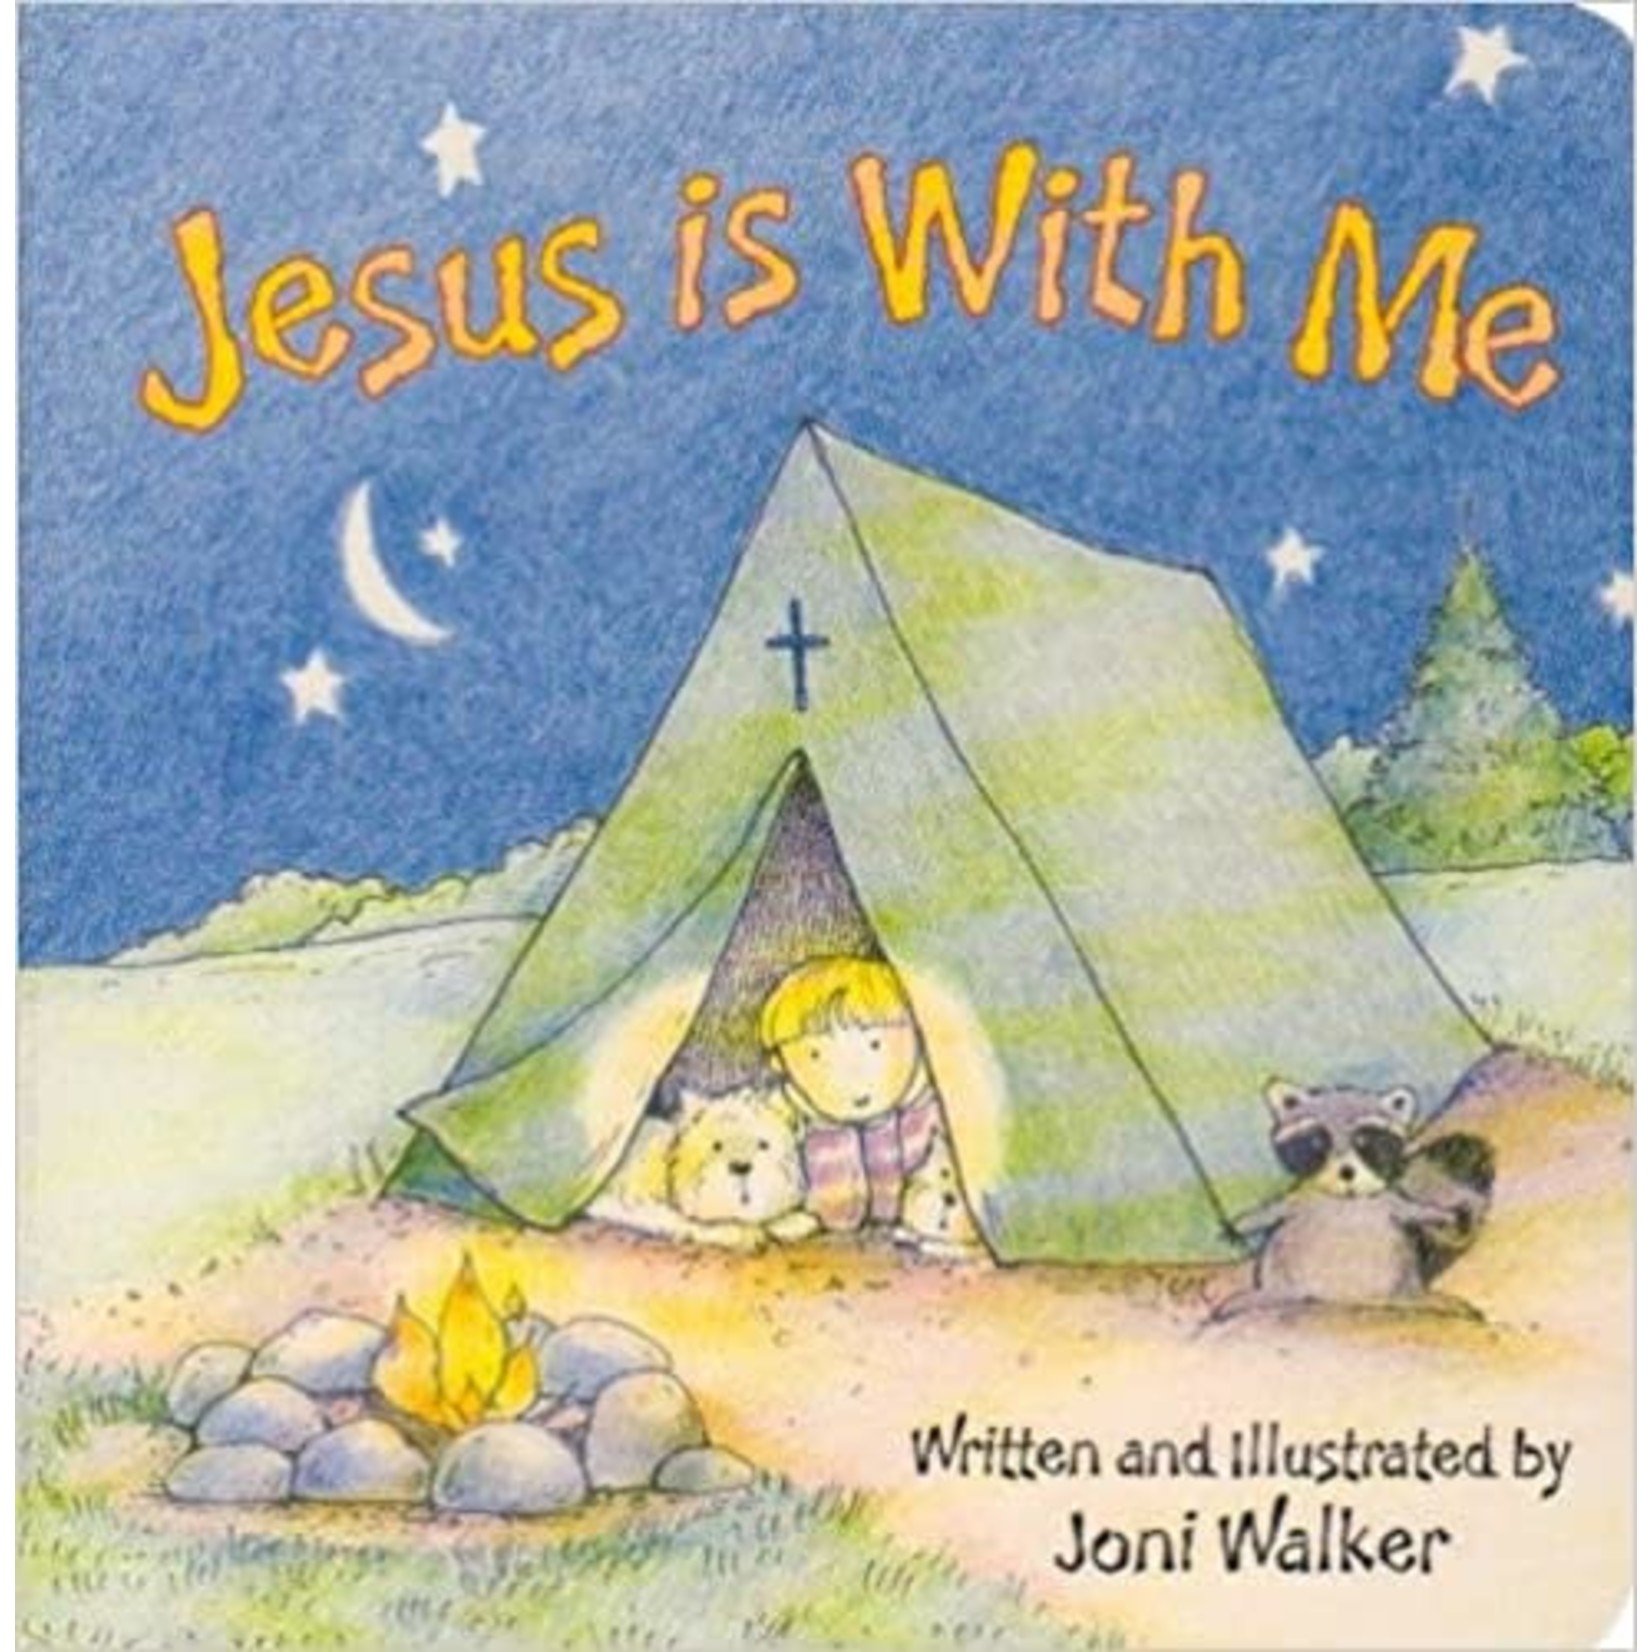 Jesus Is With Me (Board Book)